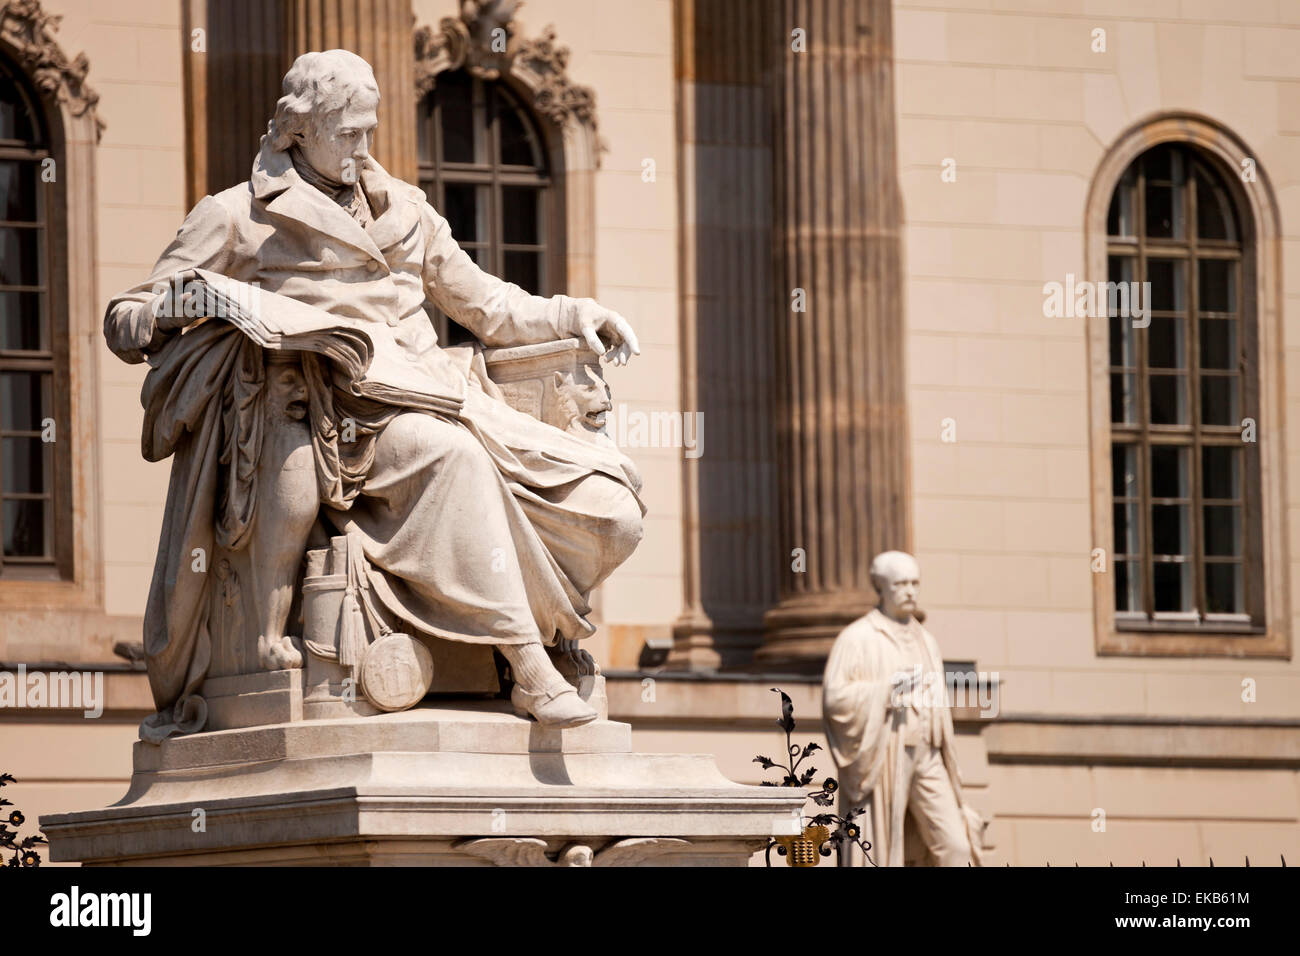 Statue of Alexander von Humboldt outside the Humboldt University in Berlin, Germany, Europe Stock Photo